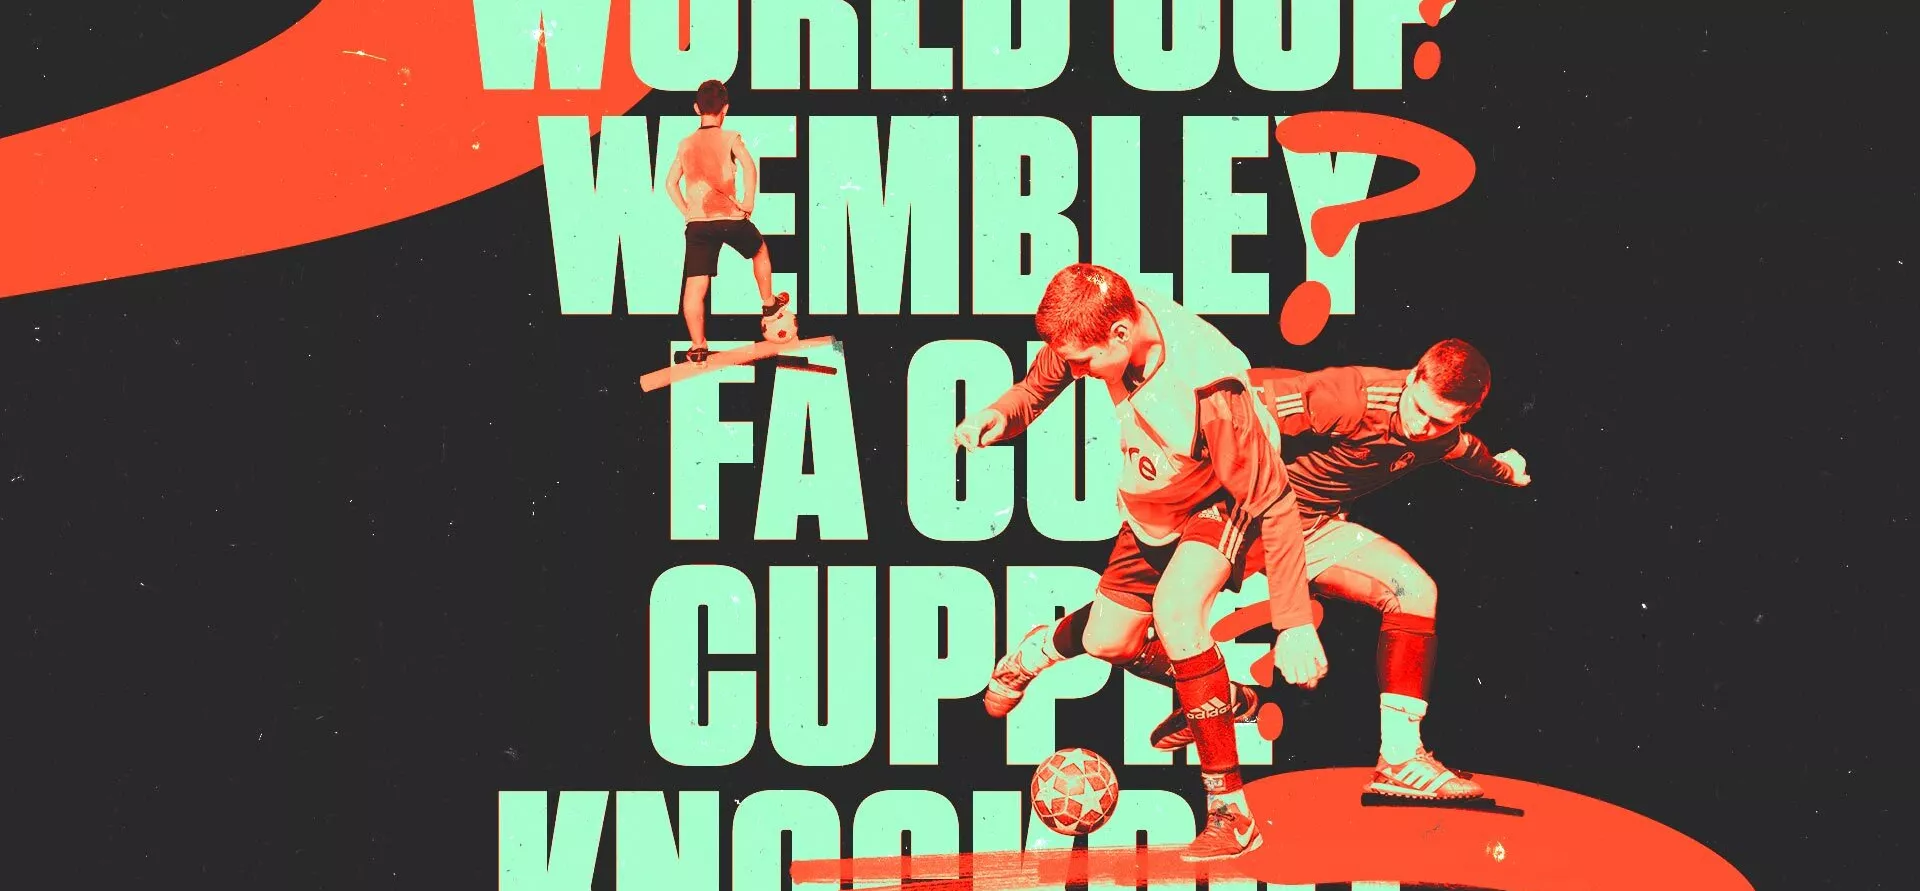 Did You Call It &#039;World Cup&#039;, &#039;Wembley&#039;, Or Something Else?